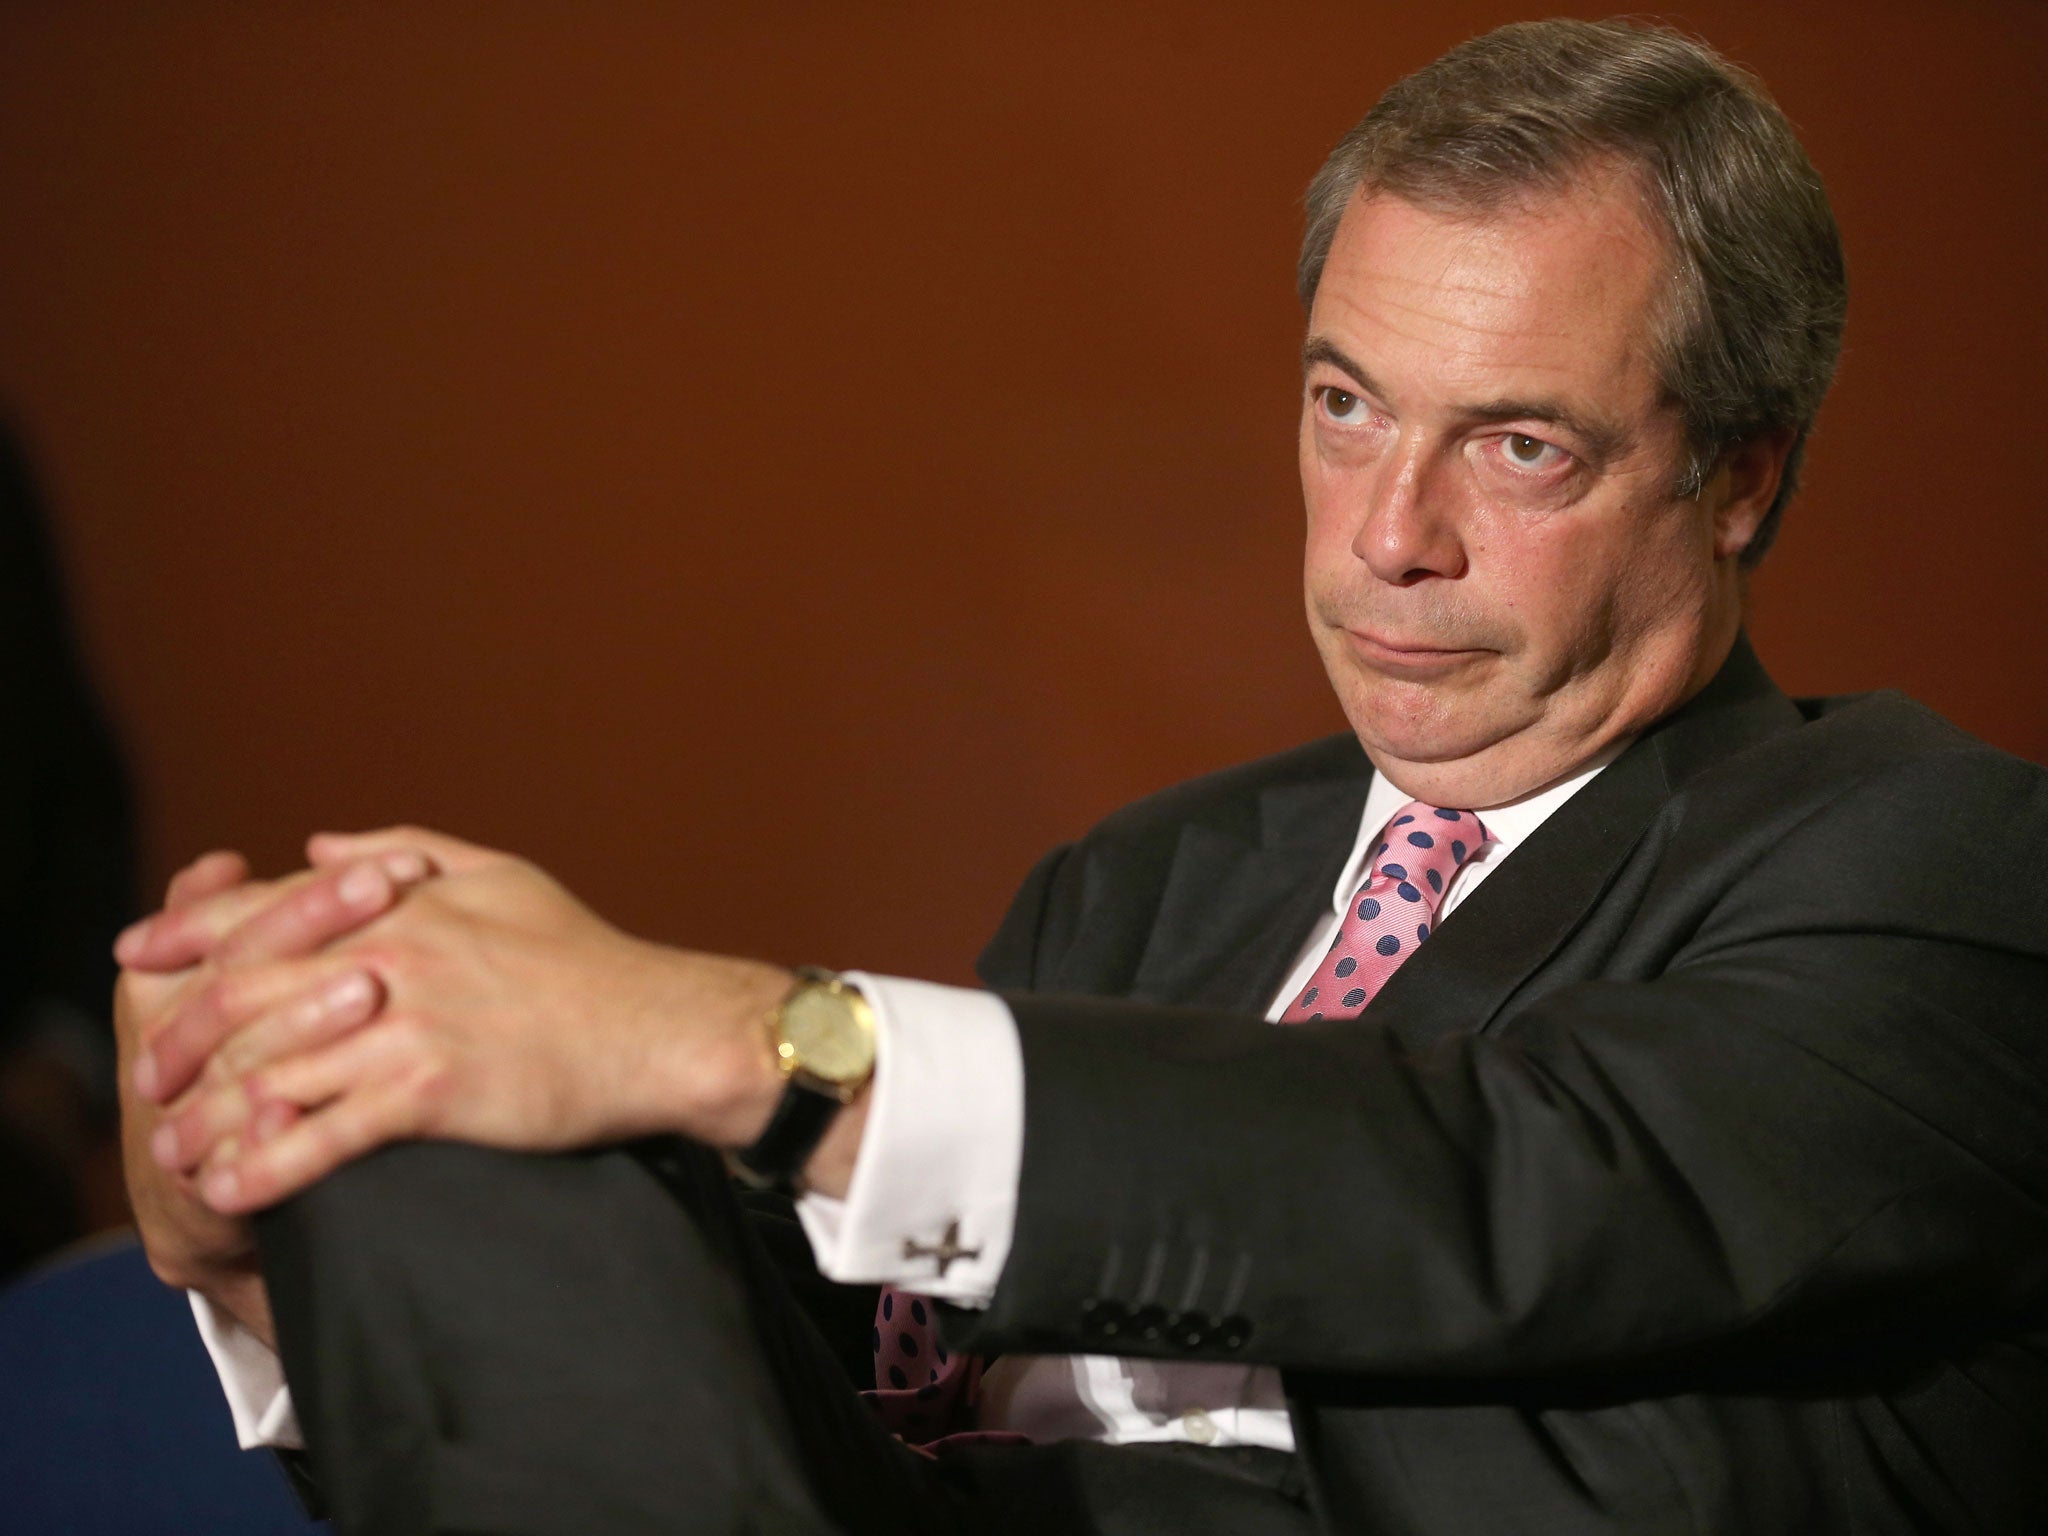 Leader of UKIP Nigel Farage as he listens to a speaker during the party conference on 20 September, 2013 in London.